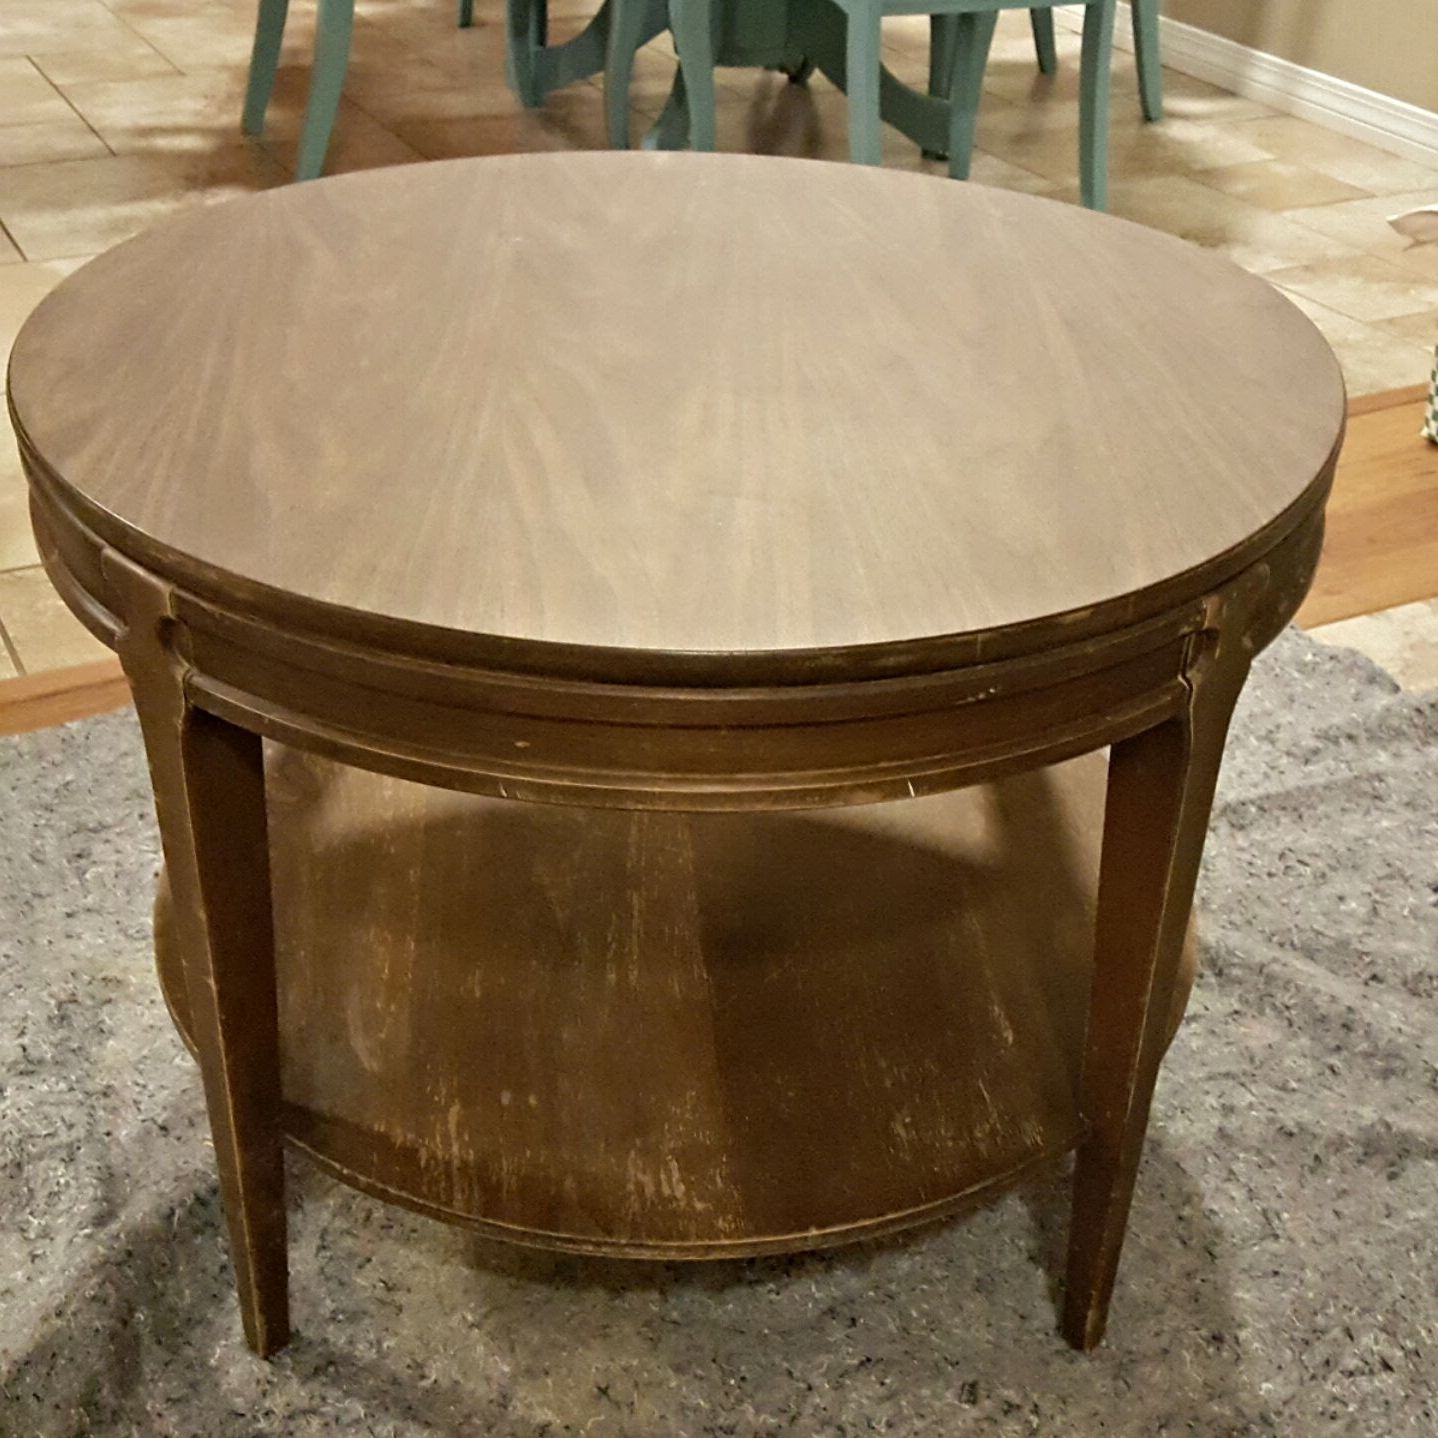 General Finishes 2018 Design Challenge Intended For Popular Vintage Coal Coffee Tables (View 7 of 10)